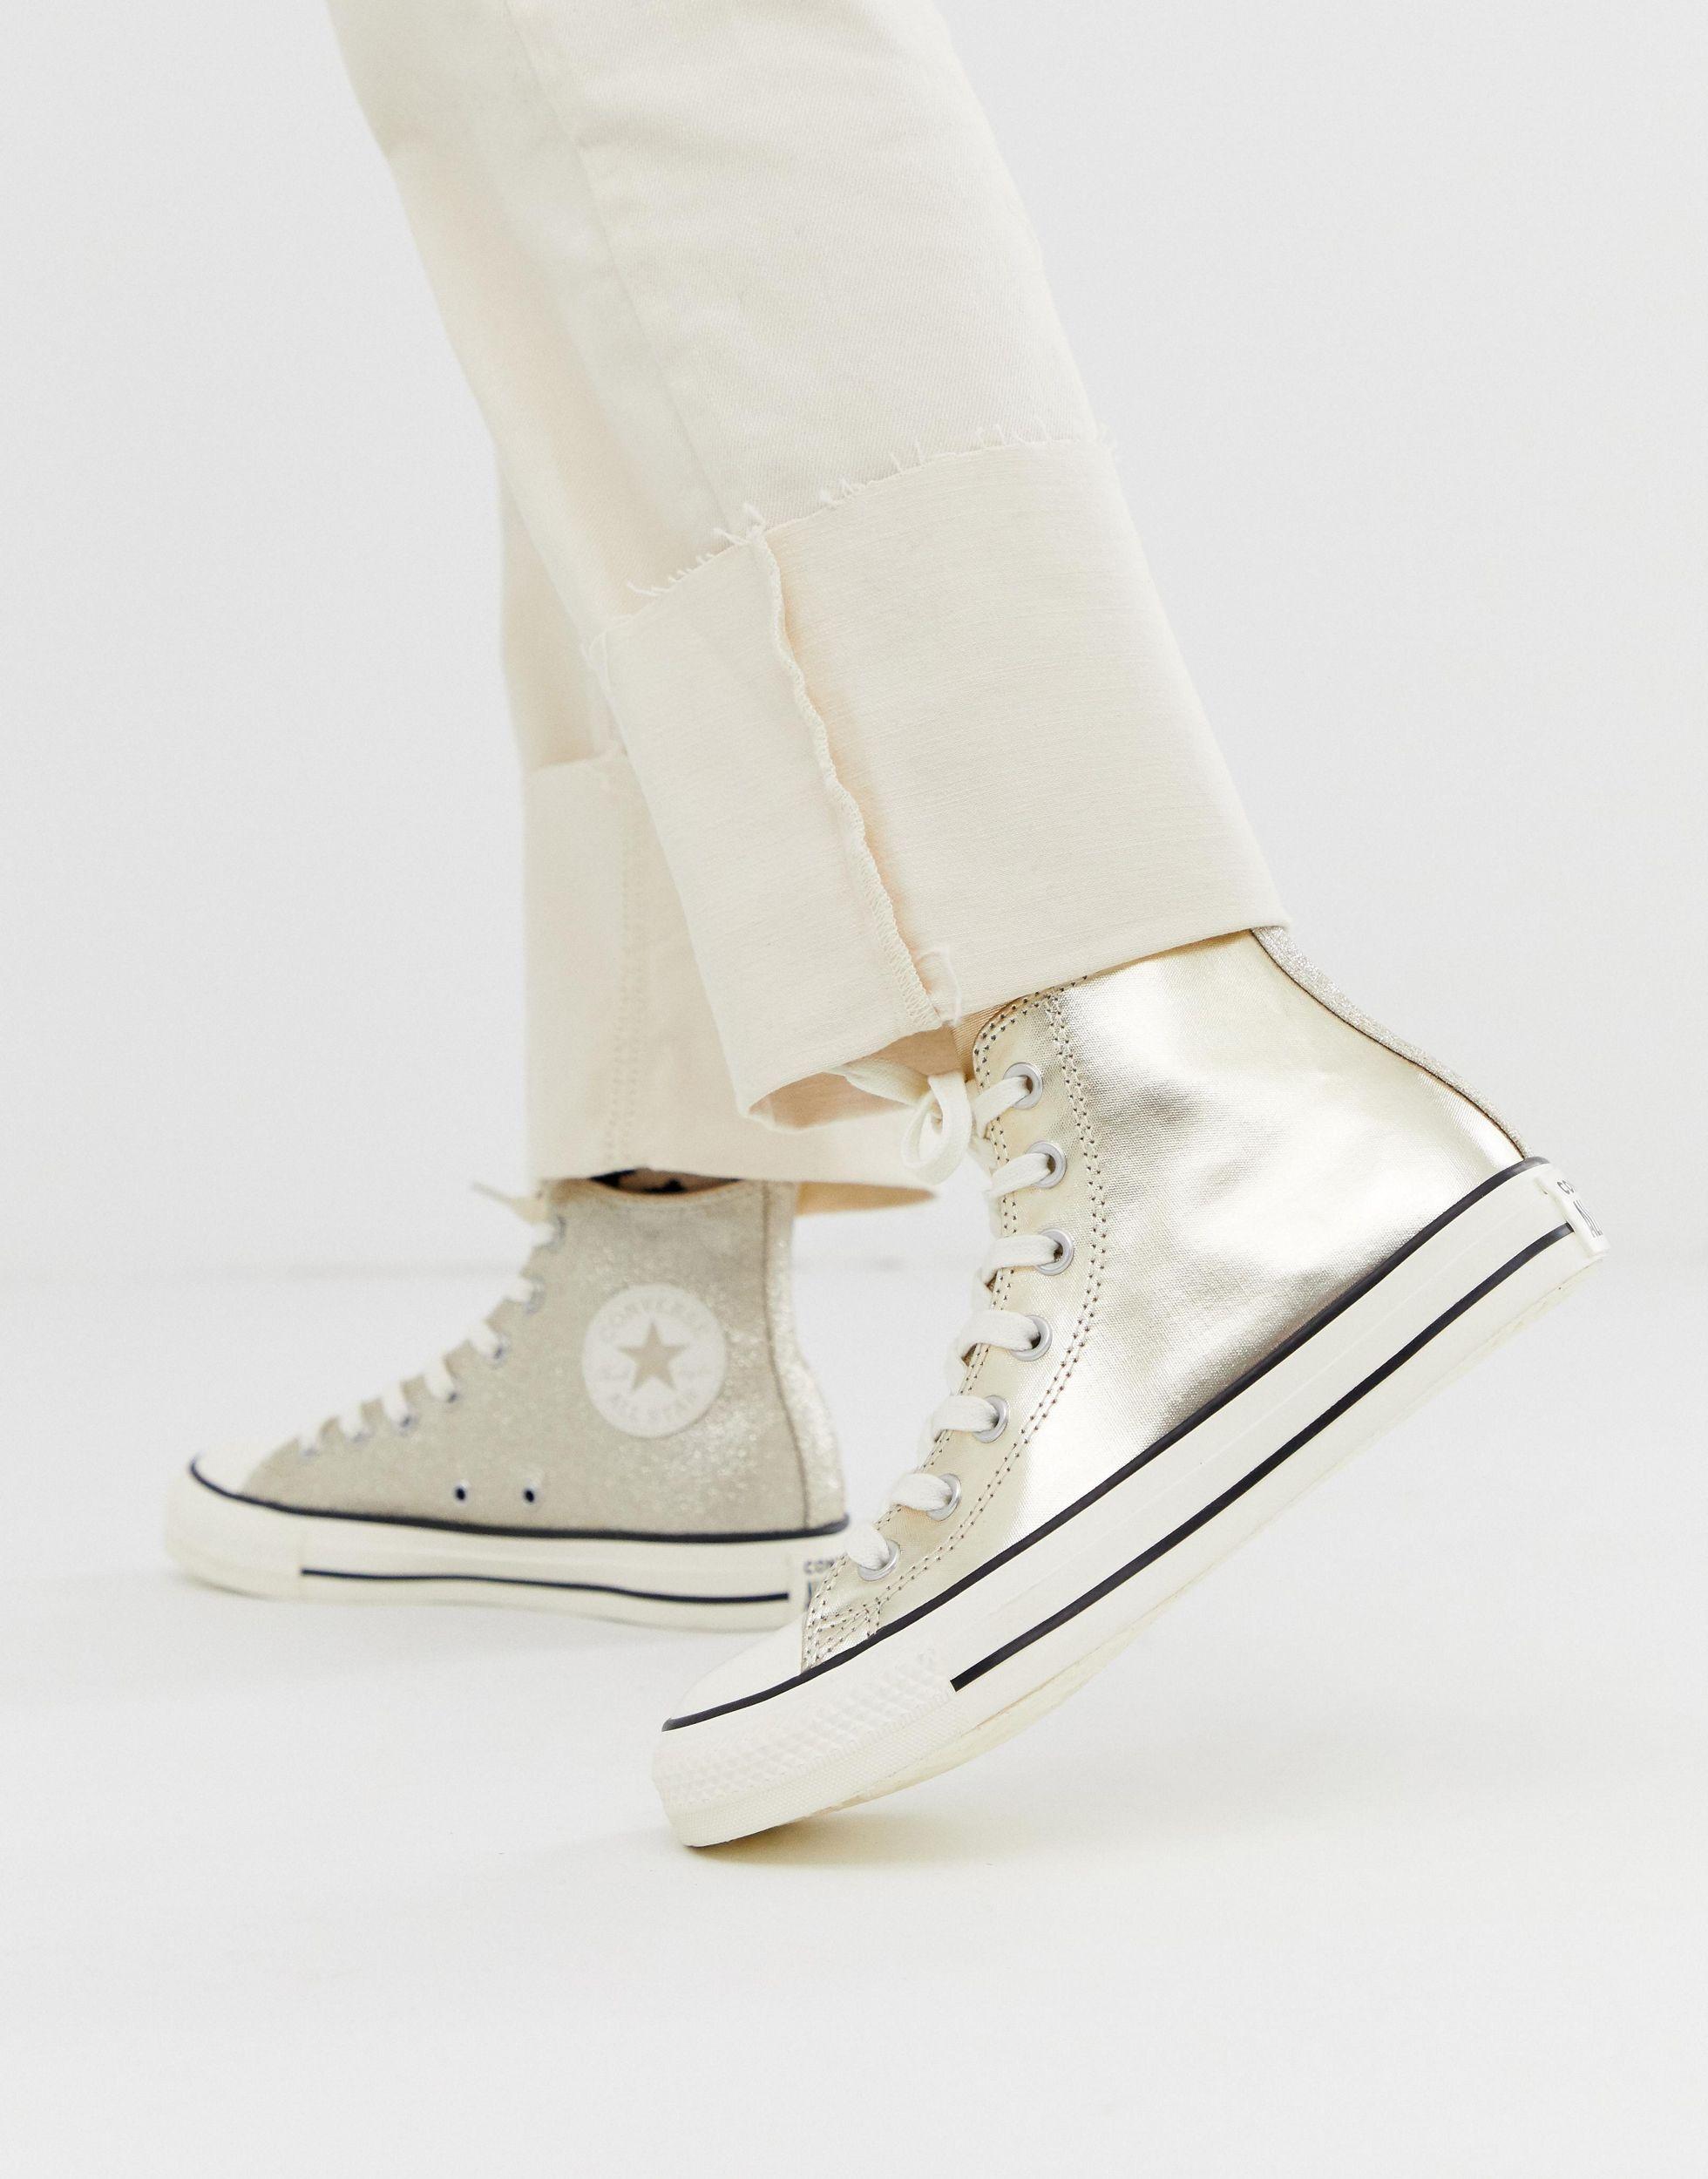 converse chuck taylor all star dainty silver glitter trainers